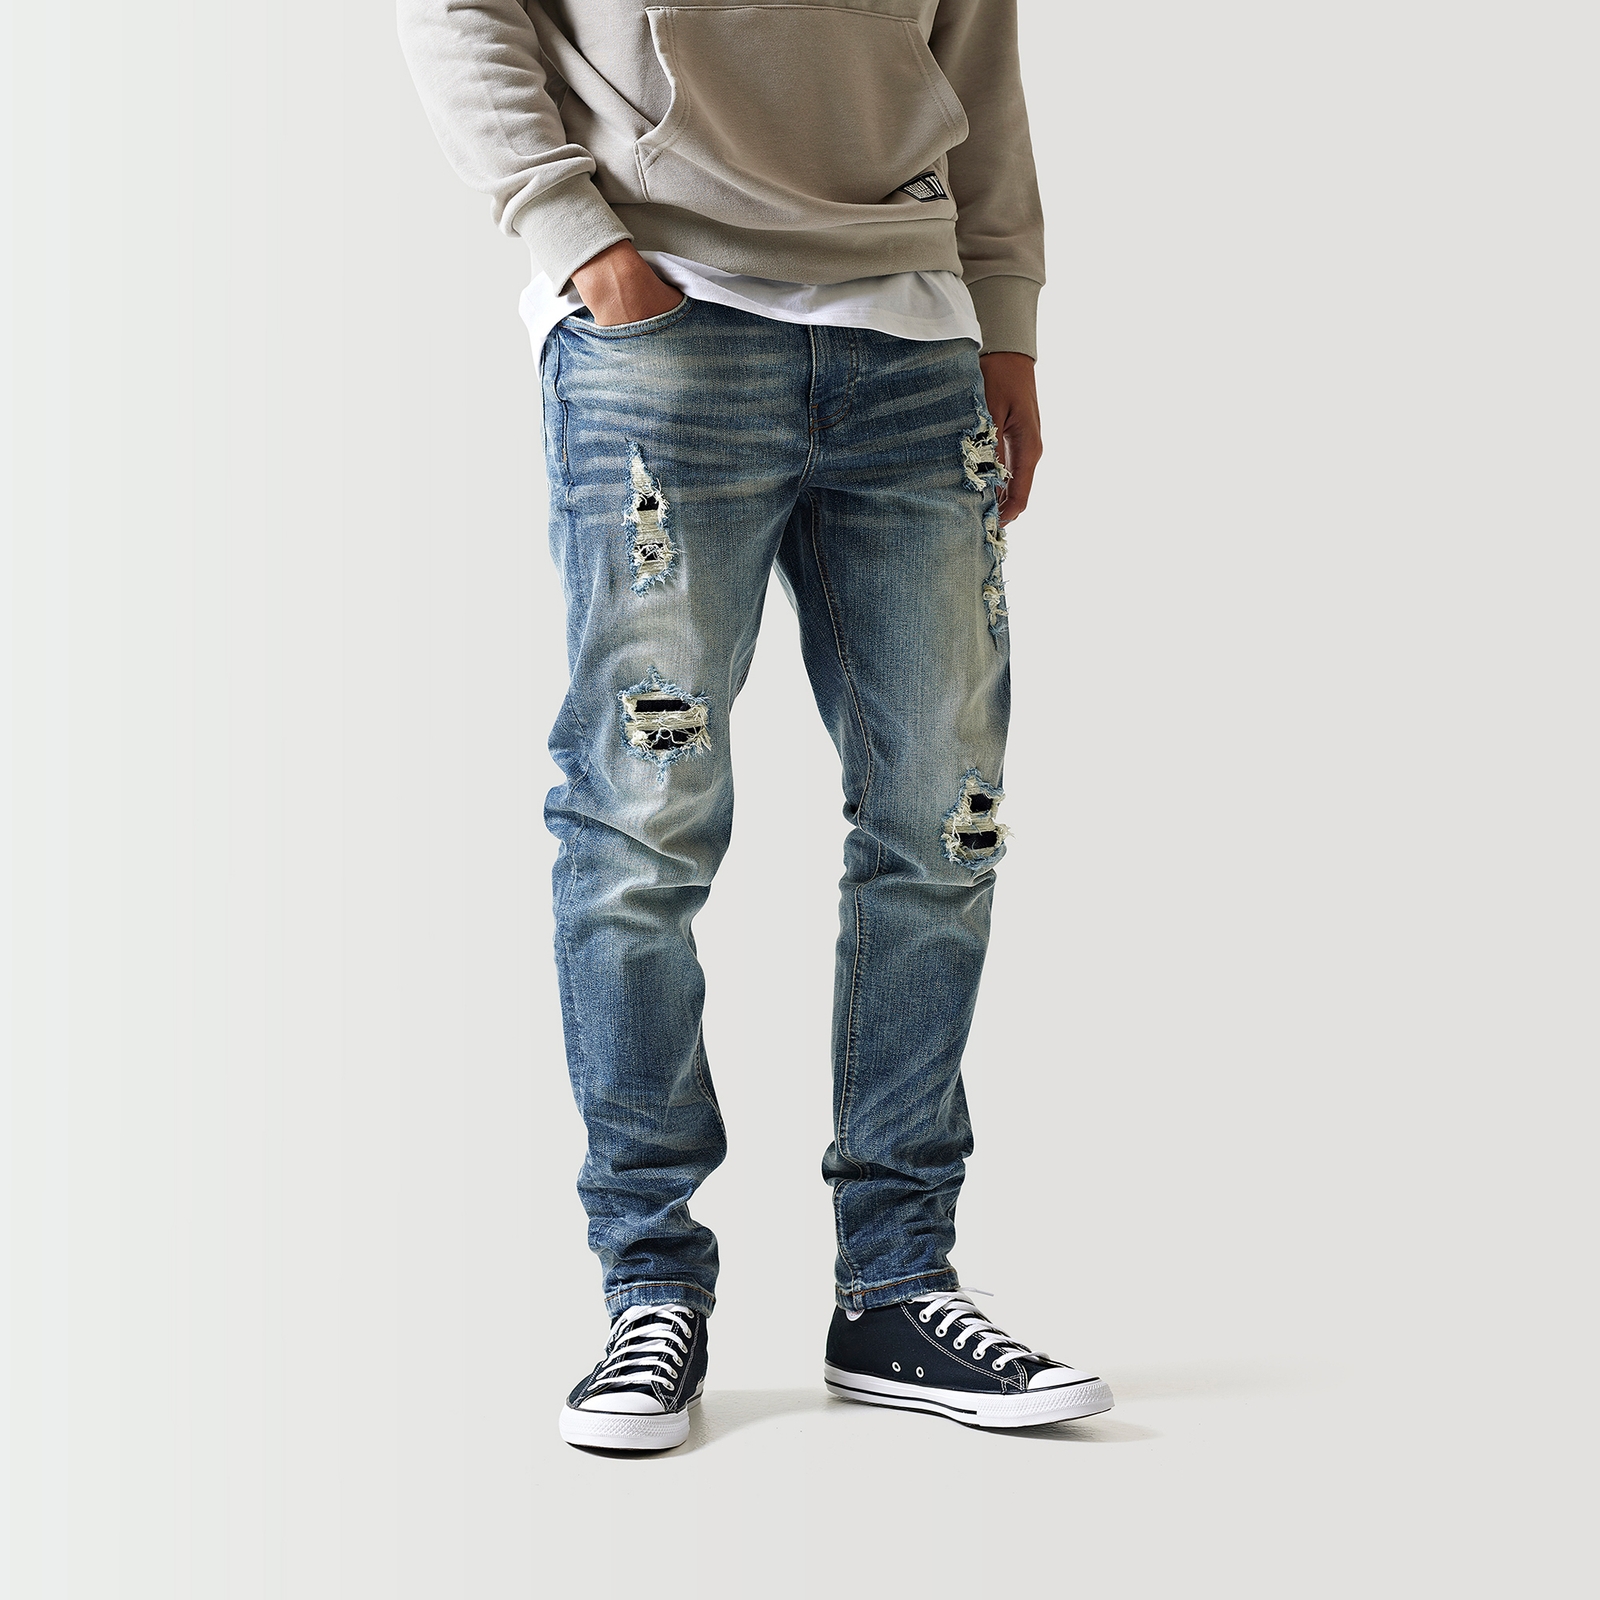 11 Degrees Sustainable Premium Ripped Jeans - Mid Blue - W28 L30 from 11 Degrees